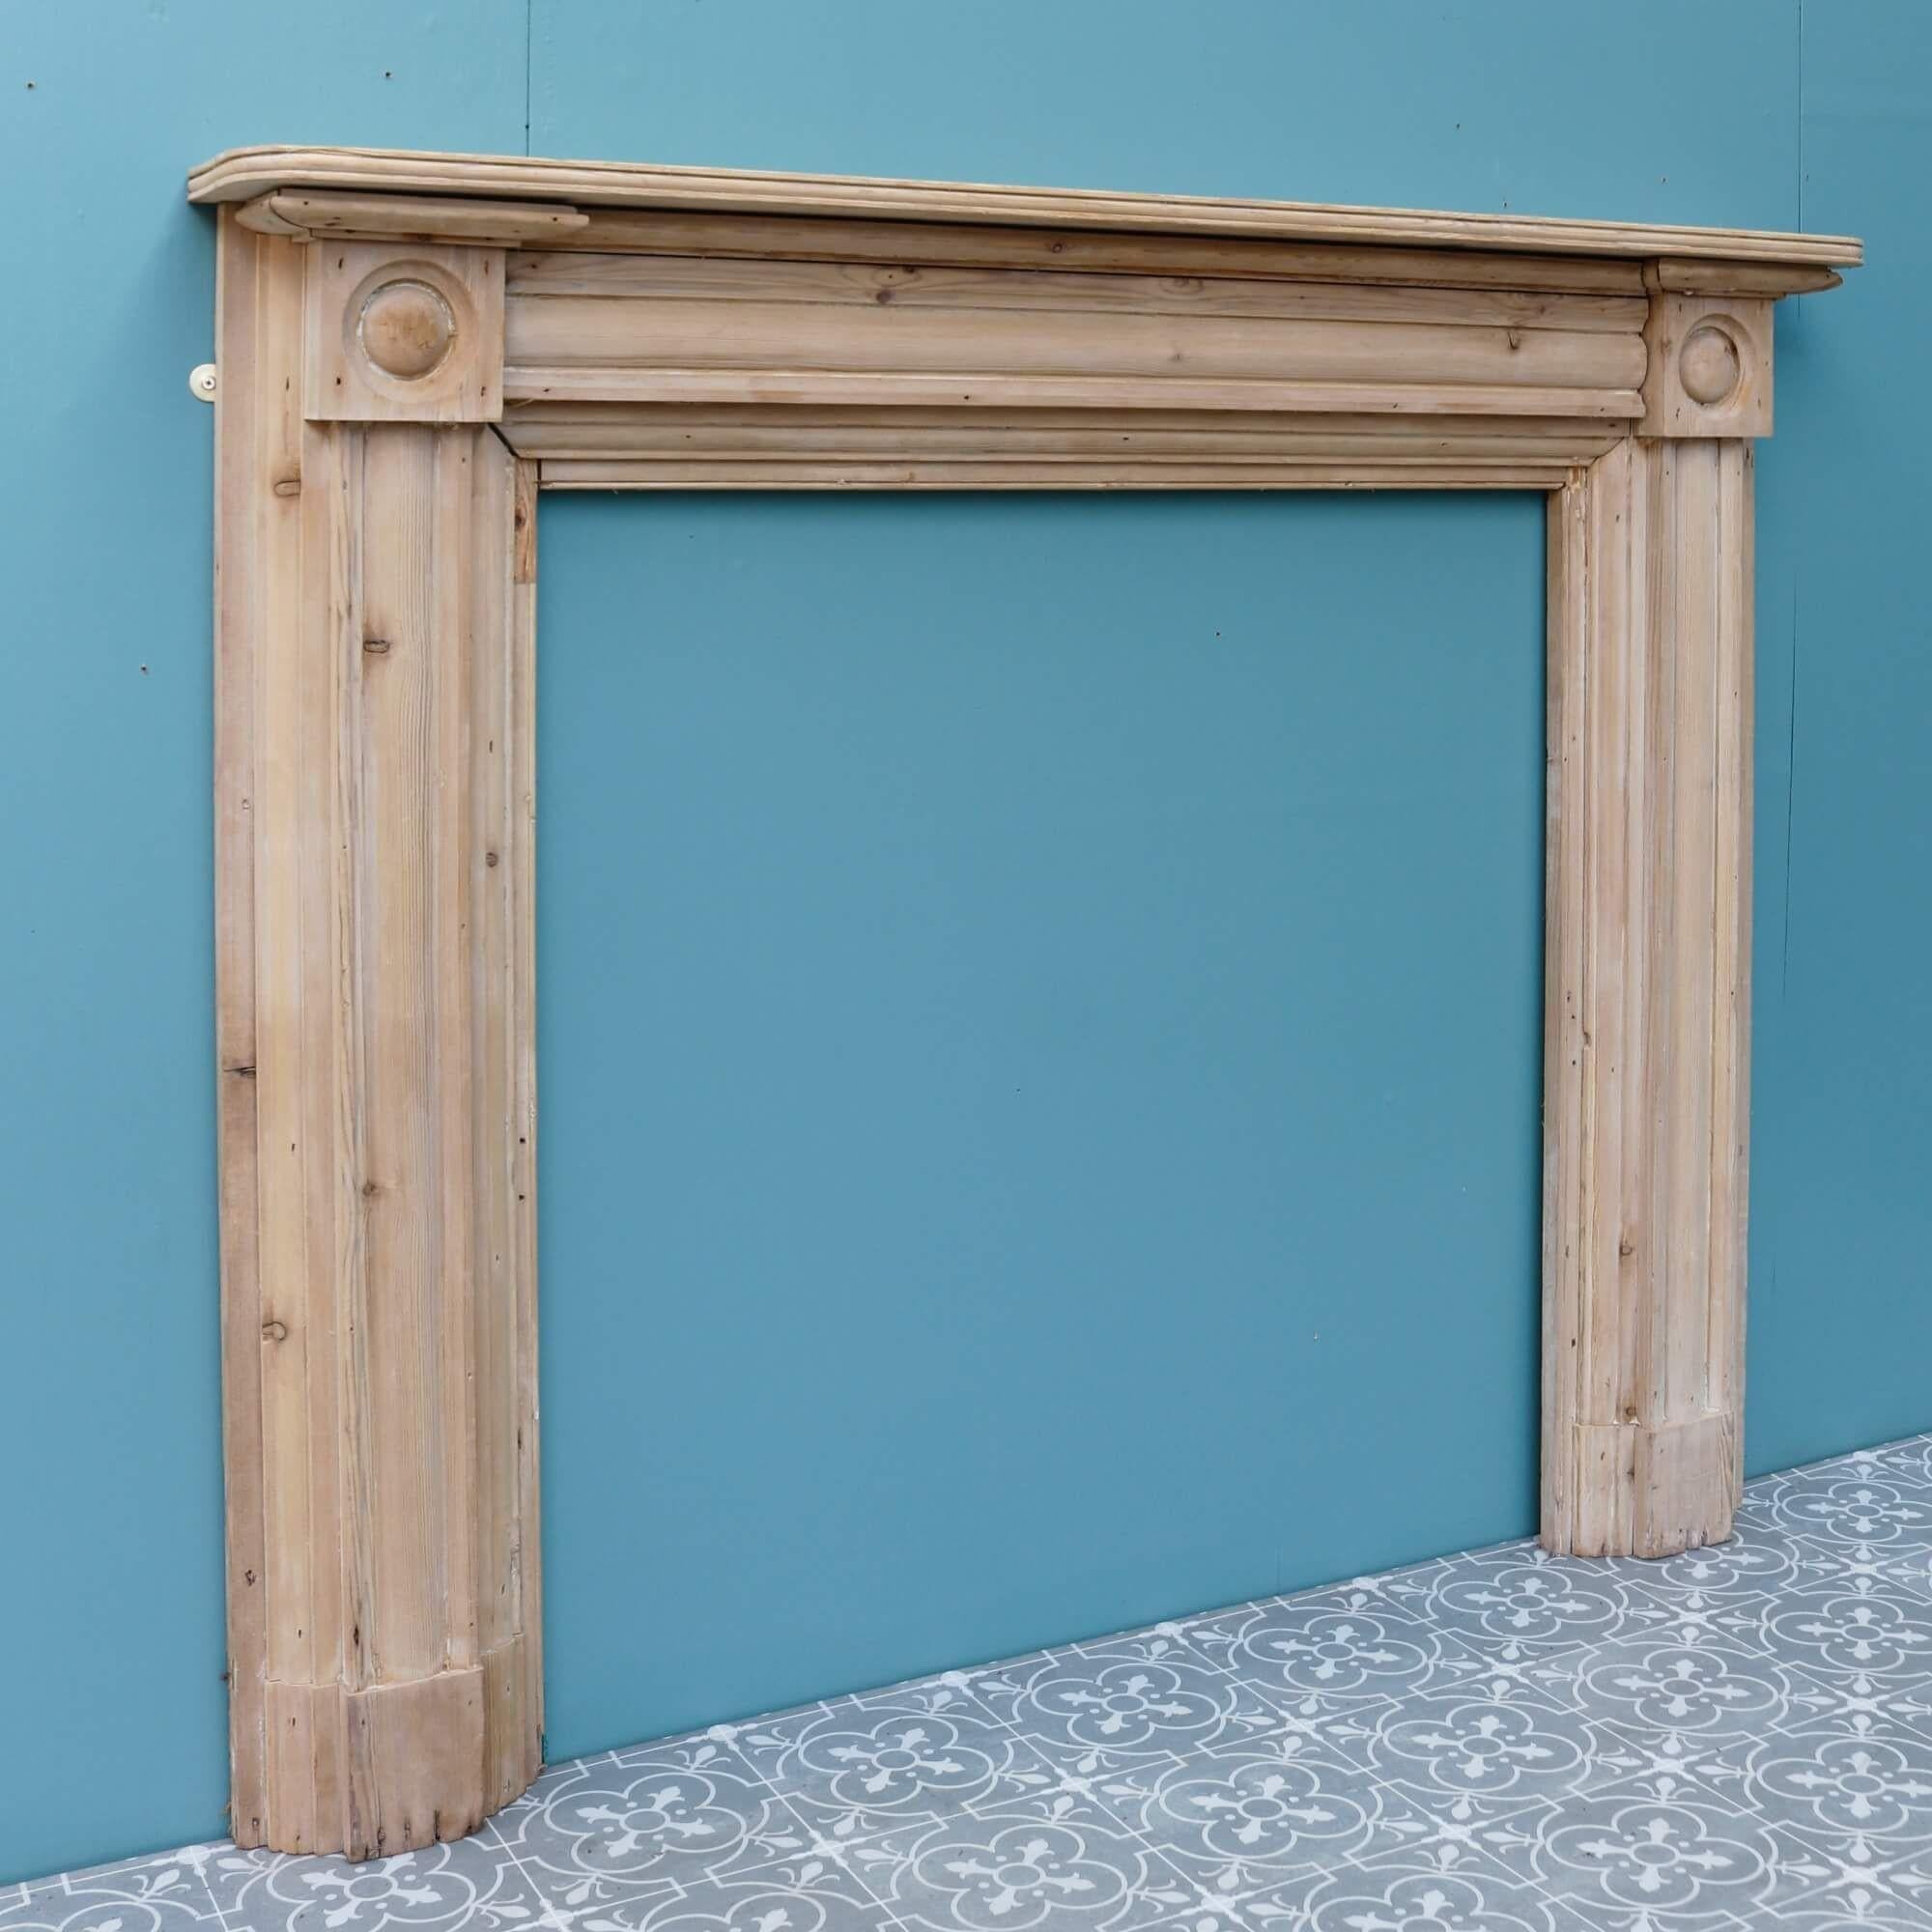 This Georgian bullseye fireplace is more than 200 years old. Though the design is simple, the antique pine surround speaks volumes in an interior, ornamented with round details called ‘bullseye’ on each end block alongside a moulded frieze and